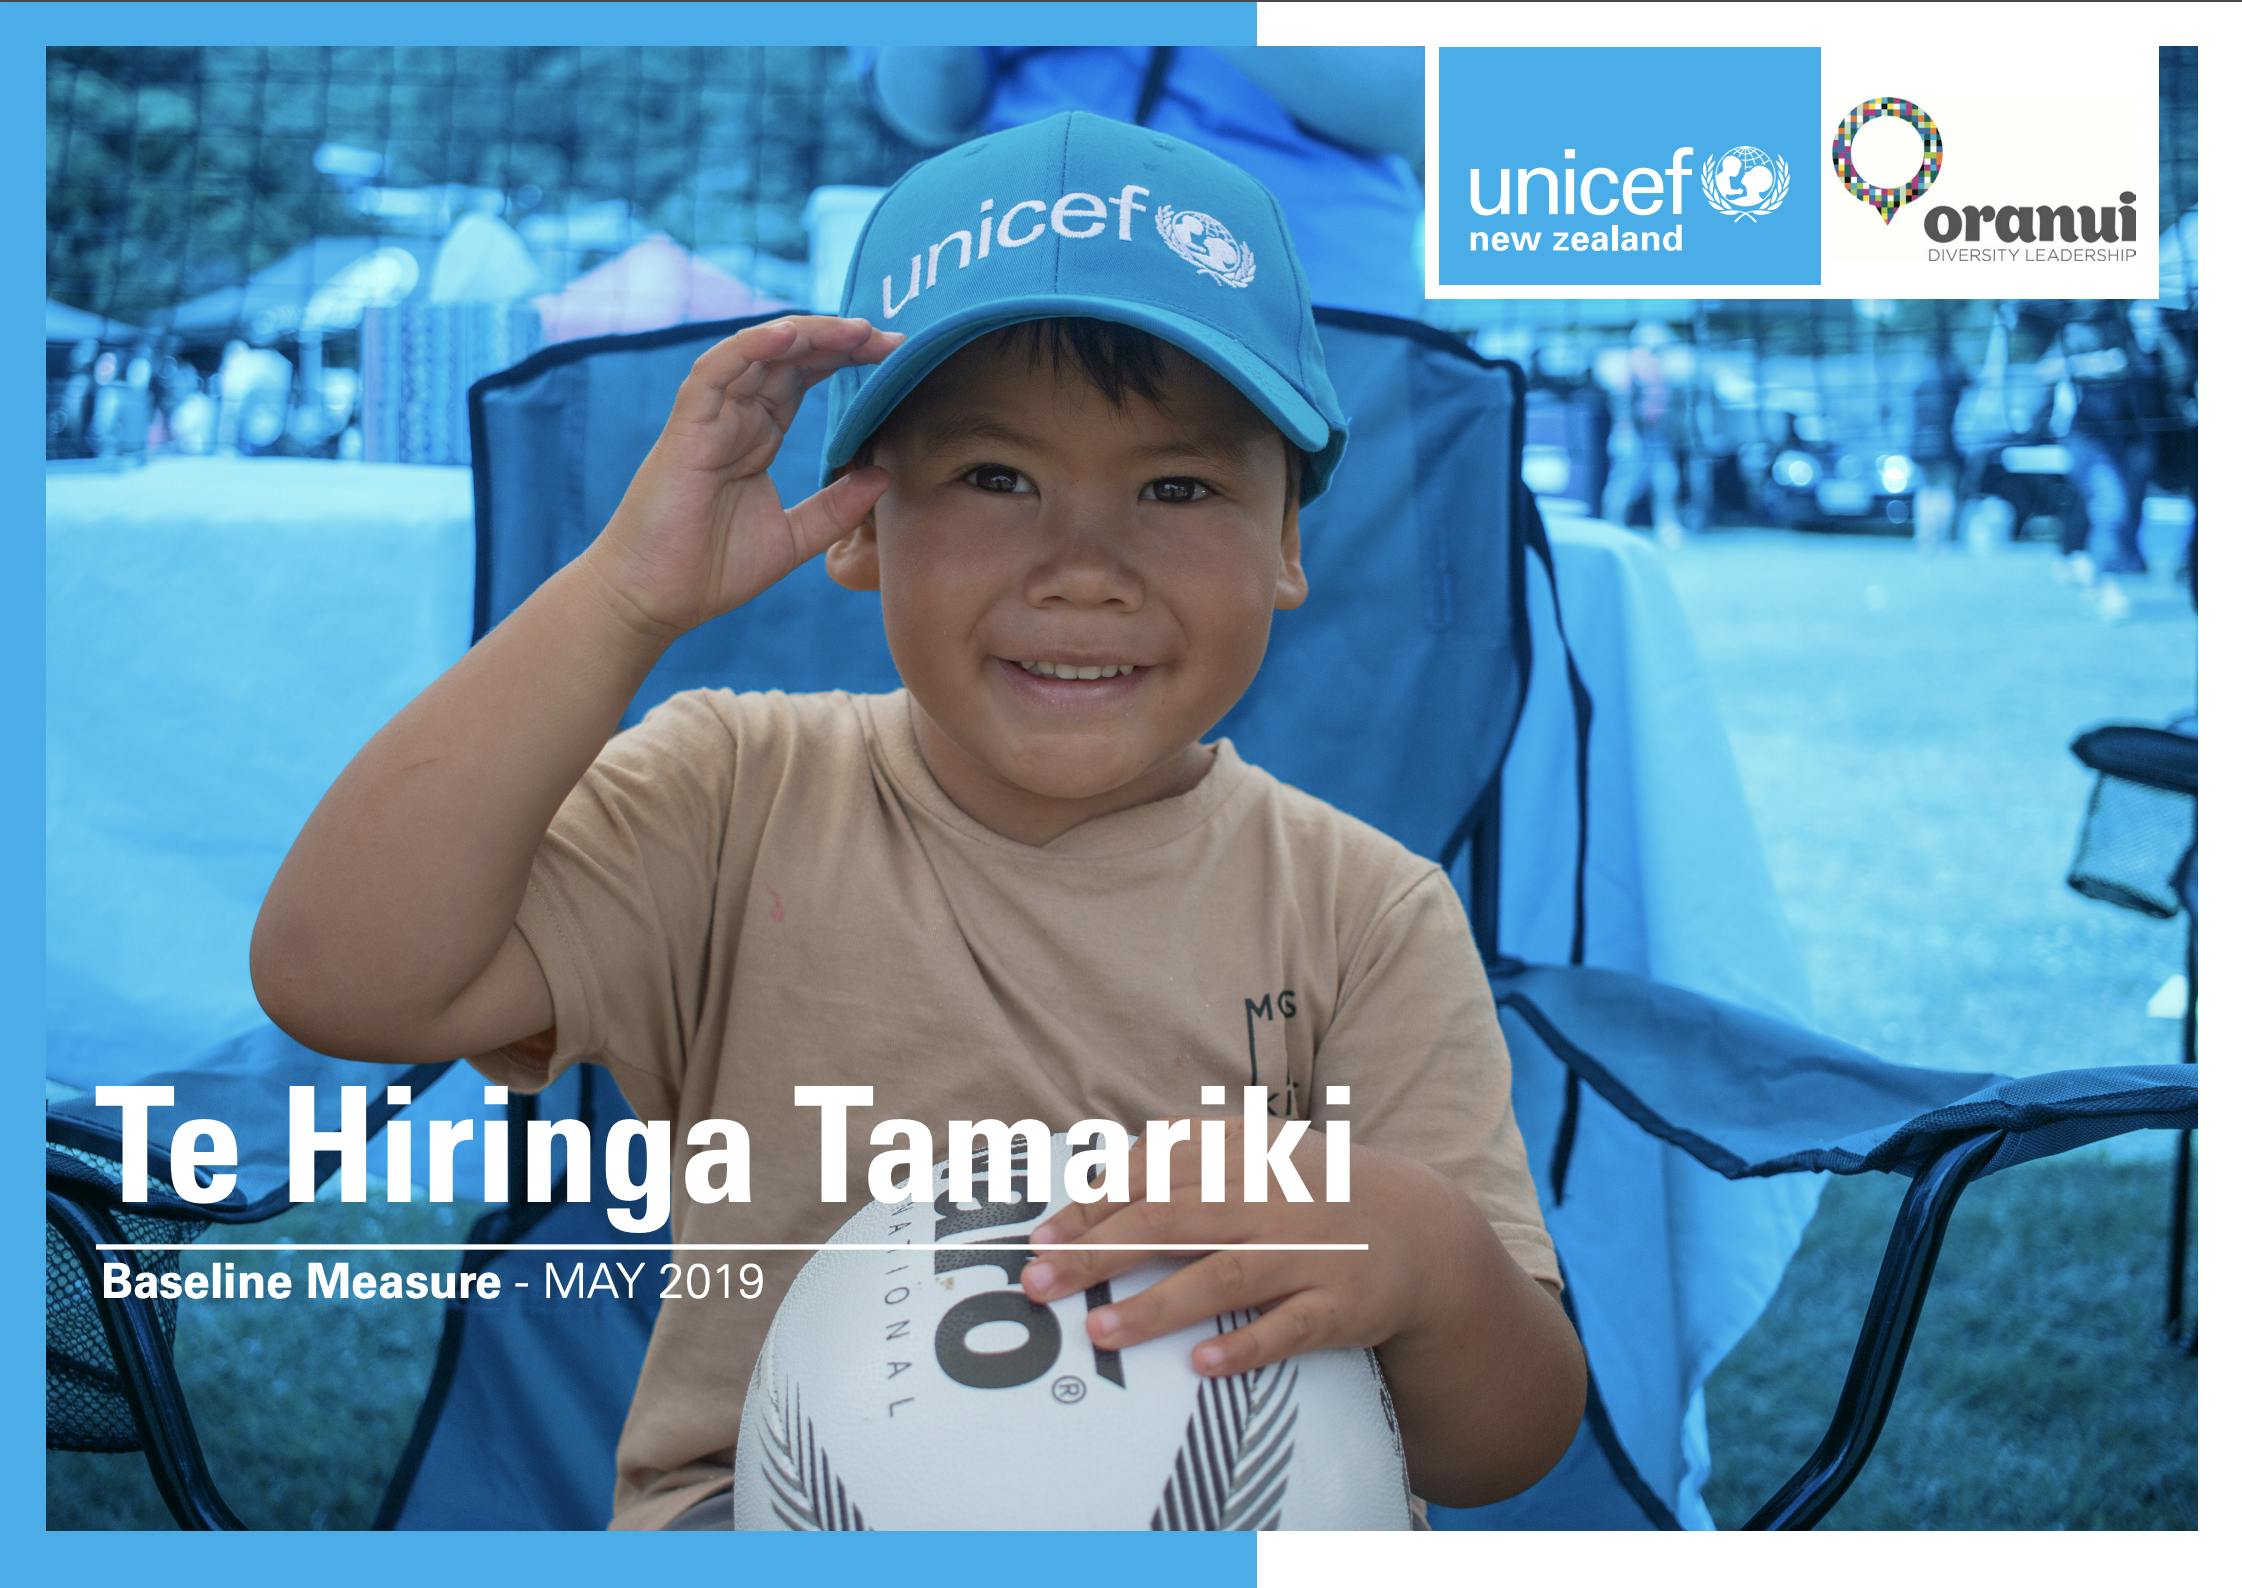 A young Maori boy smiles at the camera while wearing a UNICEF branded shirt for the Te Hiringa Tamariki Baseline Measure report in May 2019